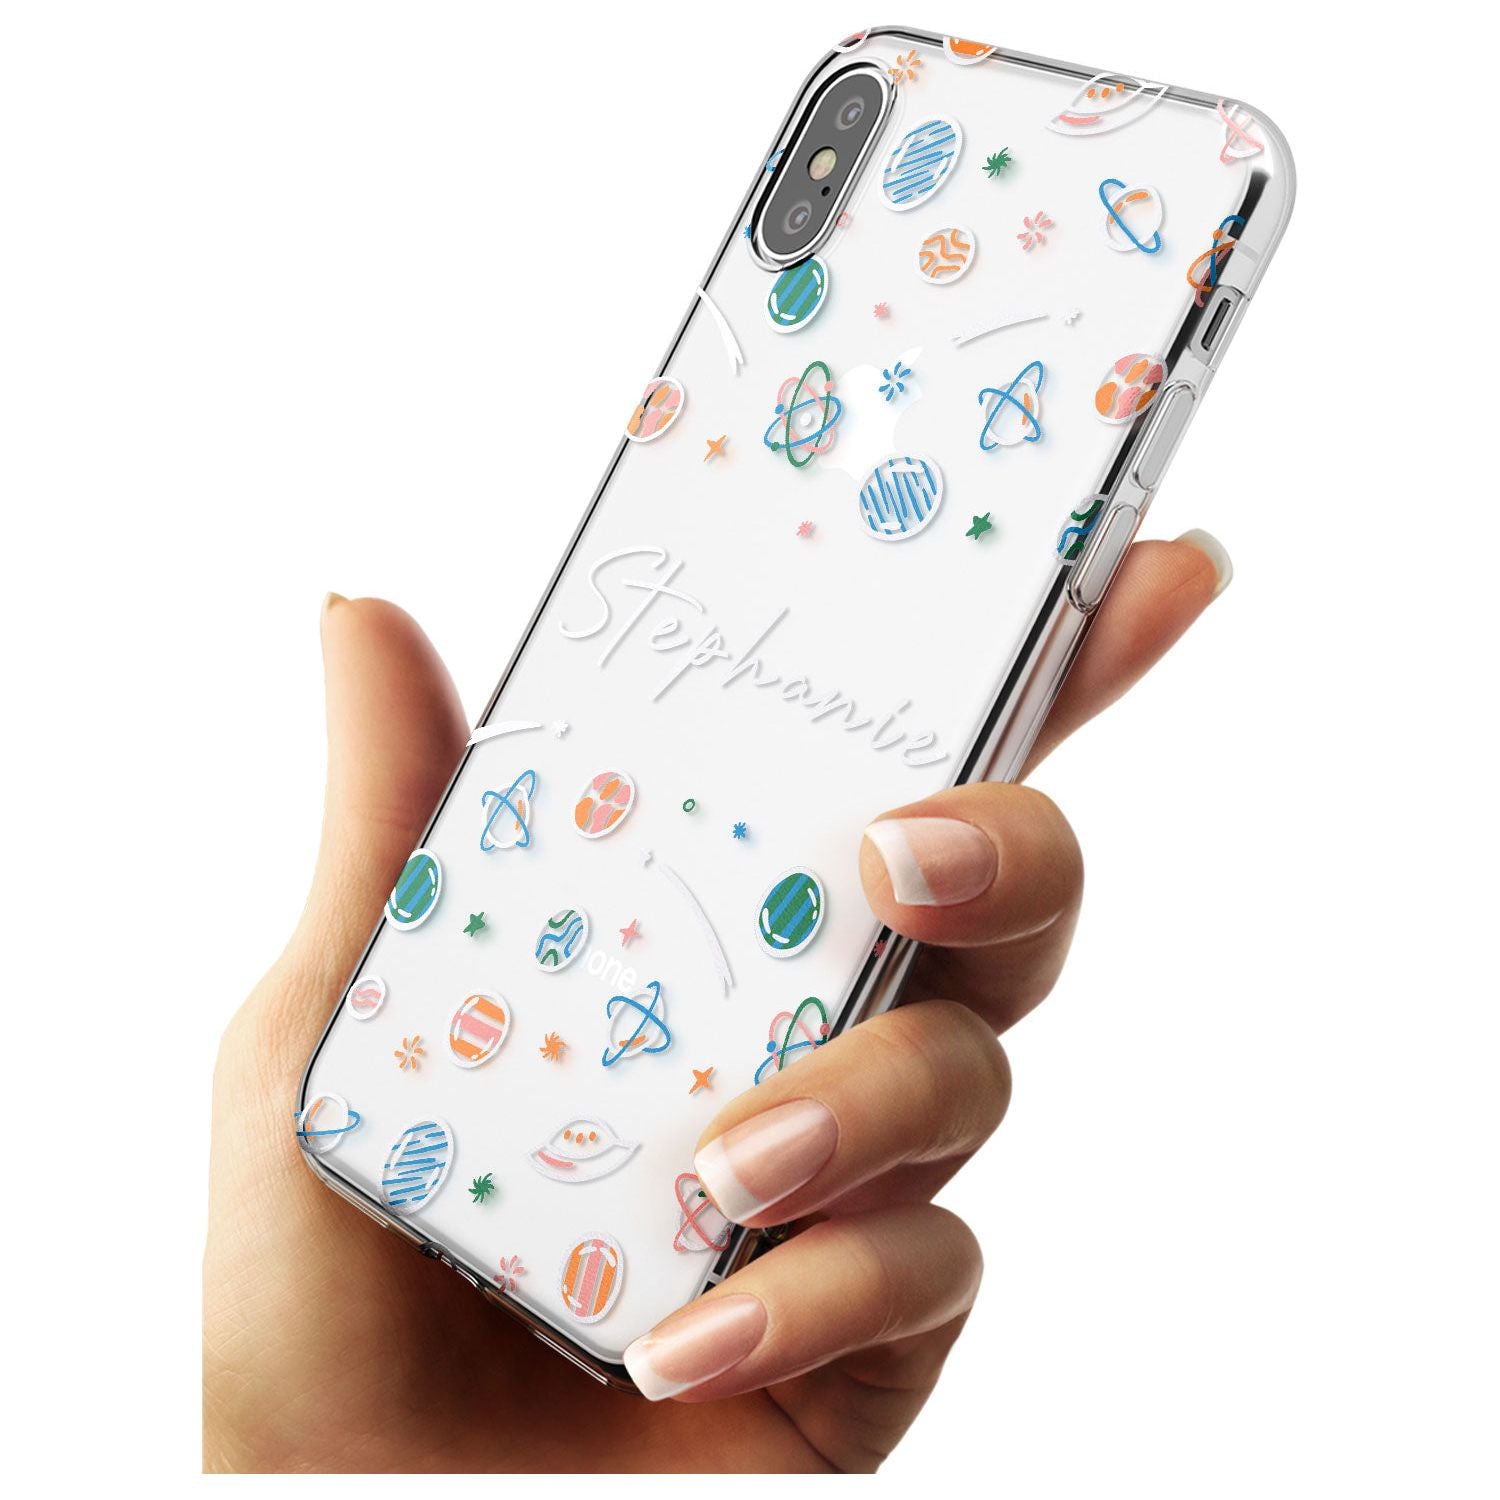 Customisable Space Pattern (Clear) Black Impact Phone Case for iPhone X XS Max XR